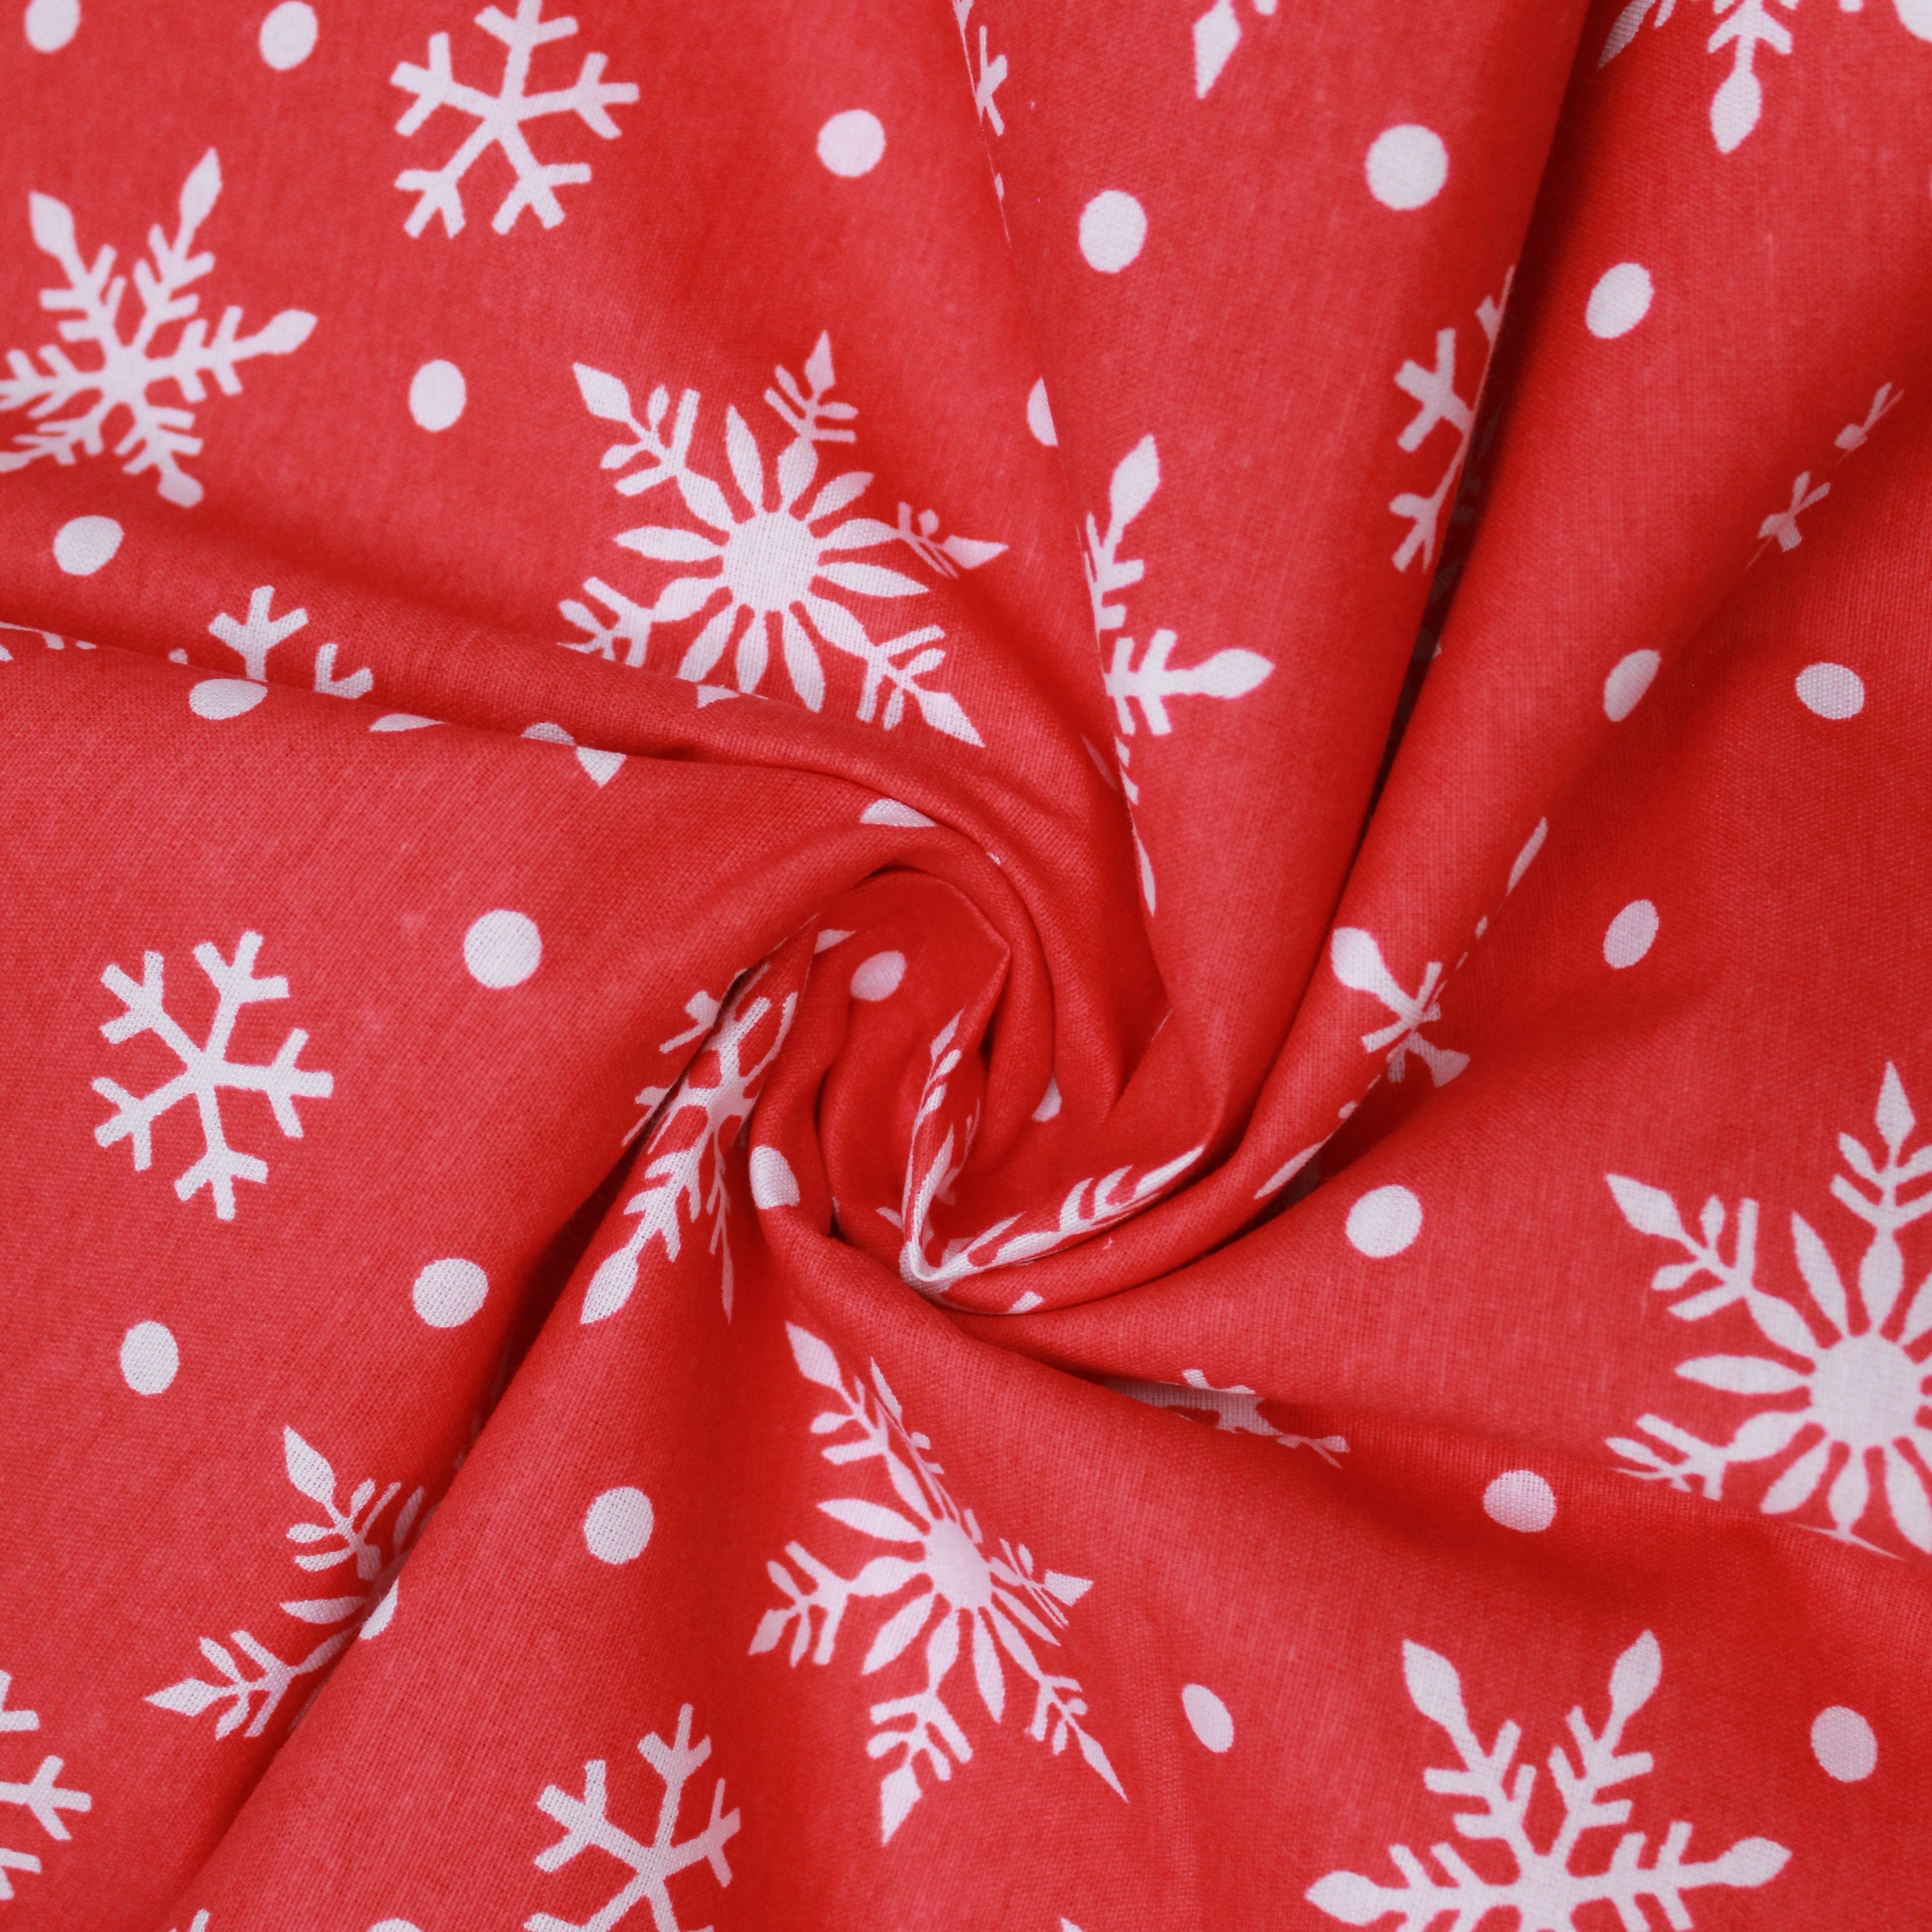 Premium Quality Super Wide Cotton Blend Sheeting "White On Red Snowflake" 94" Wide Red